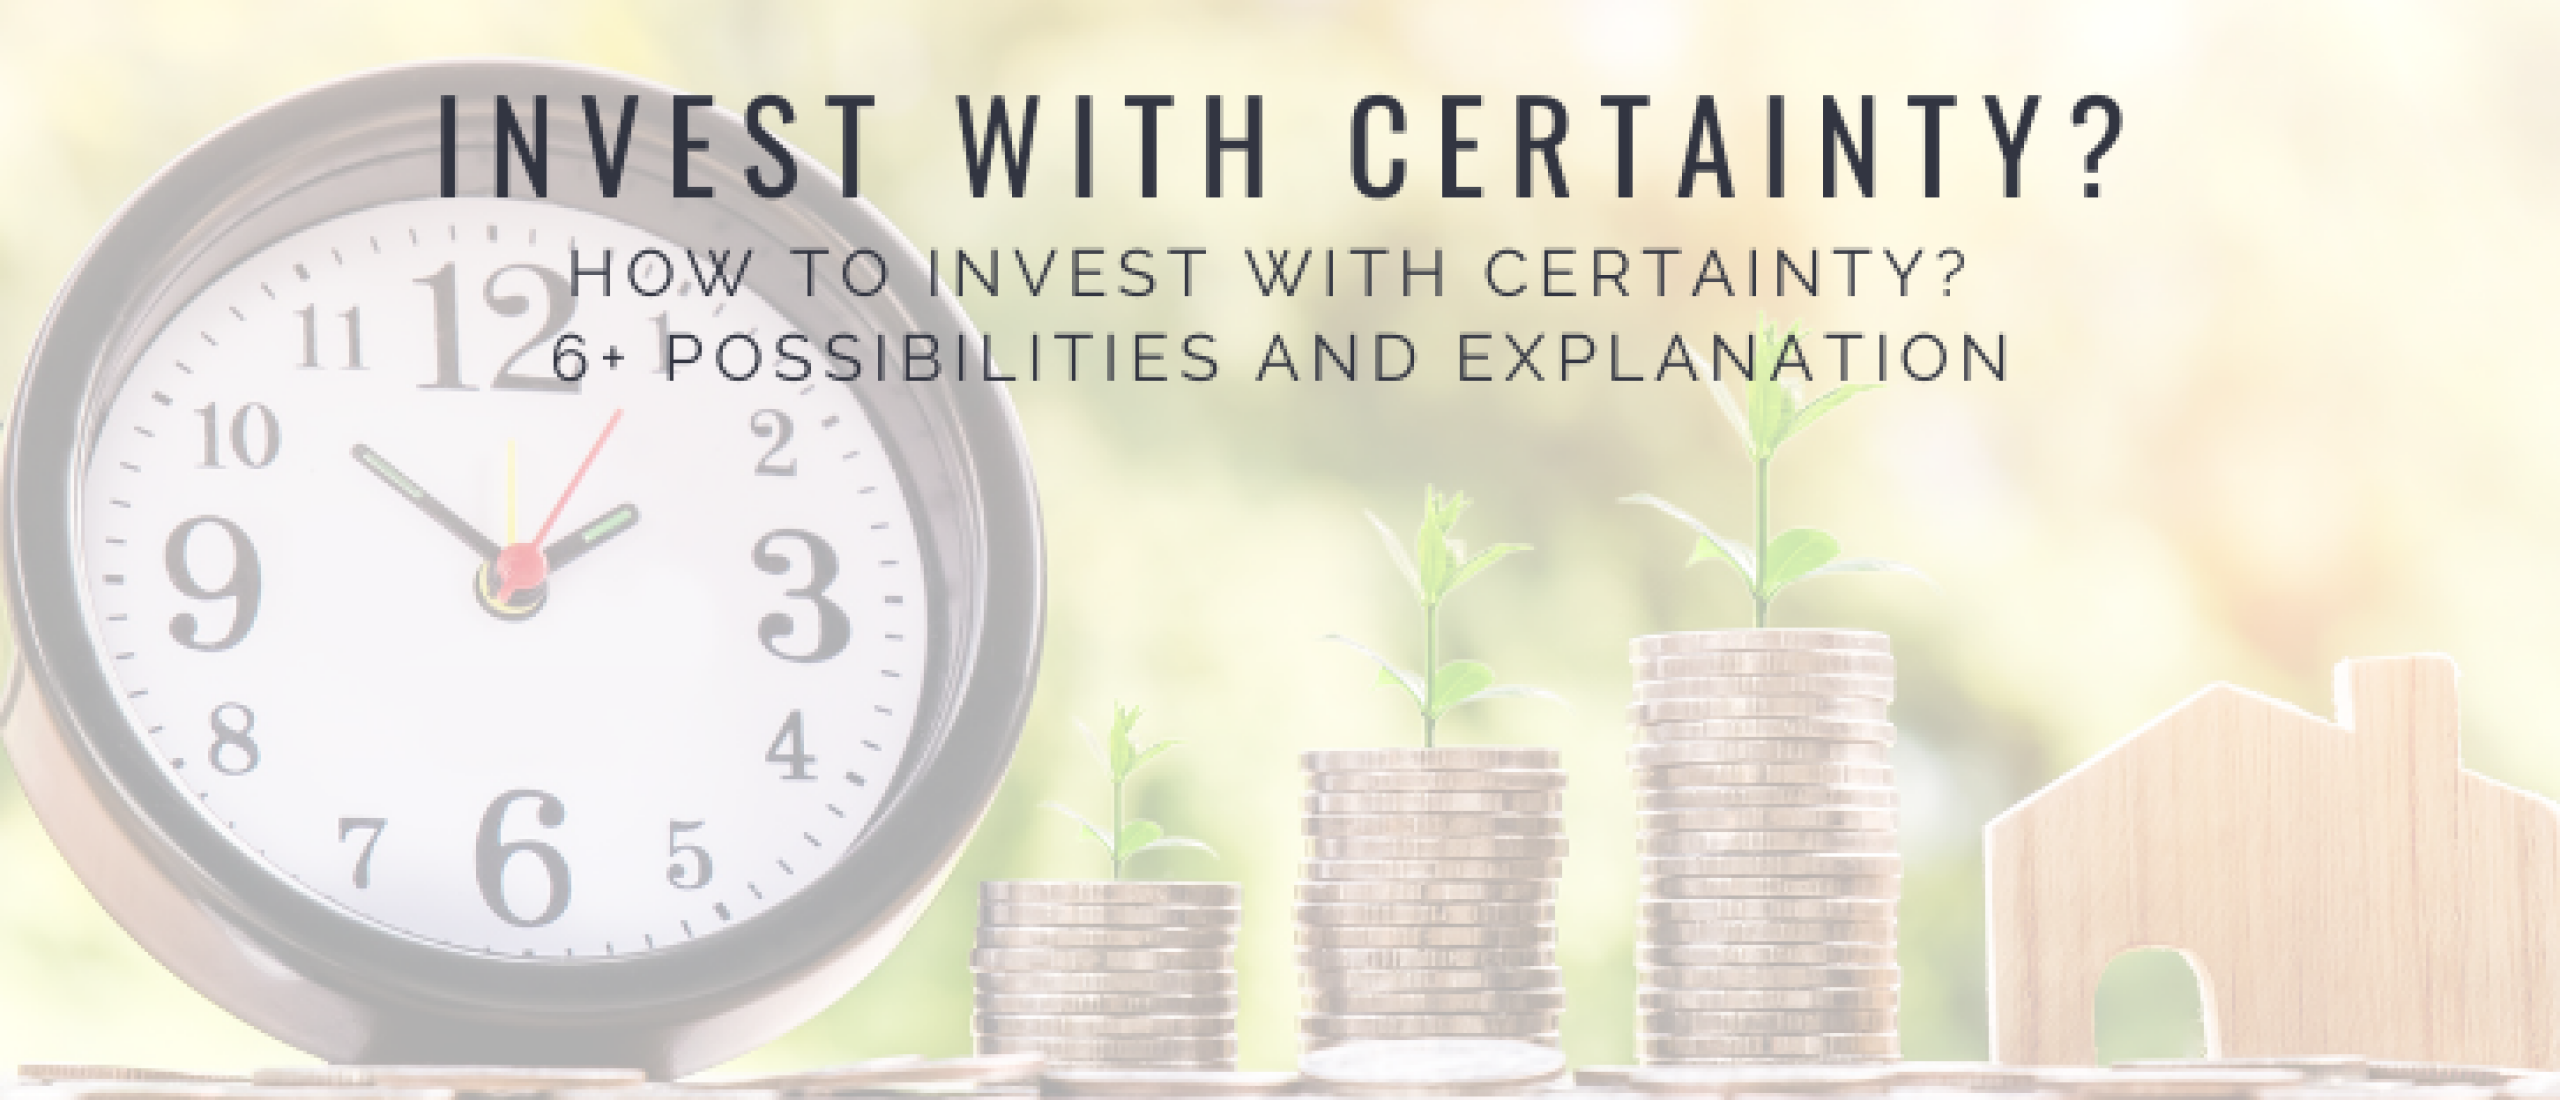 How to Invest with Certainty? 6+ Possibilities and Explanation